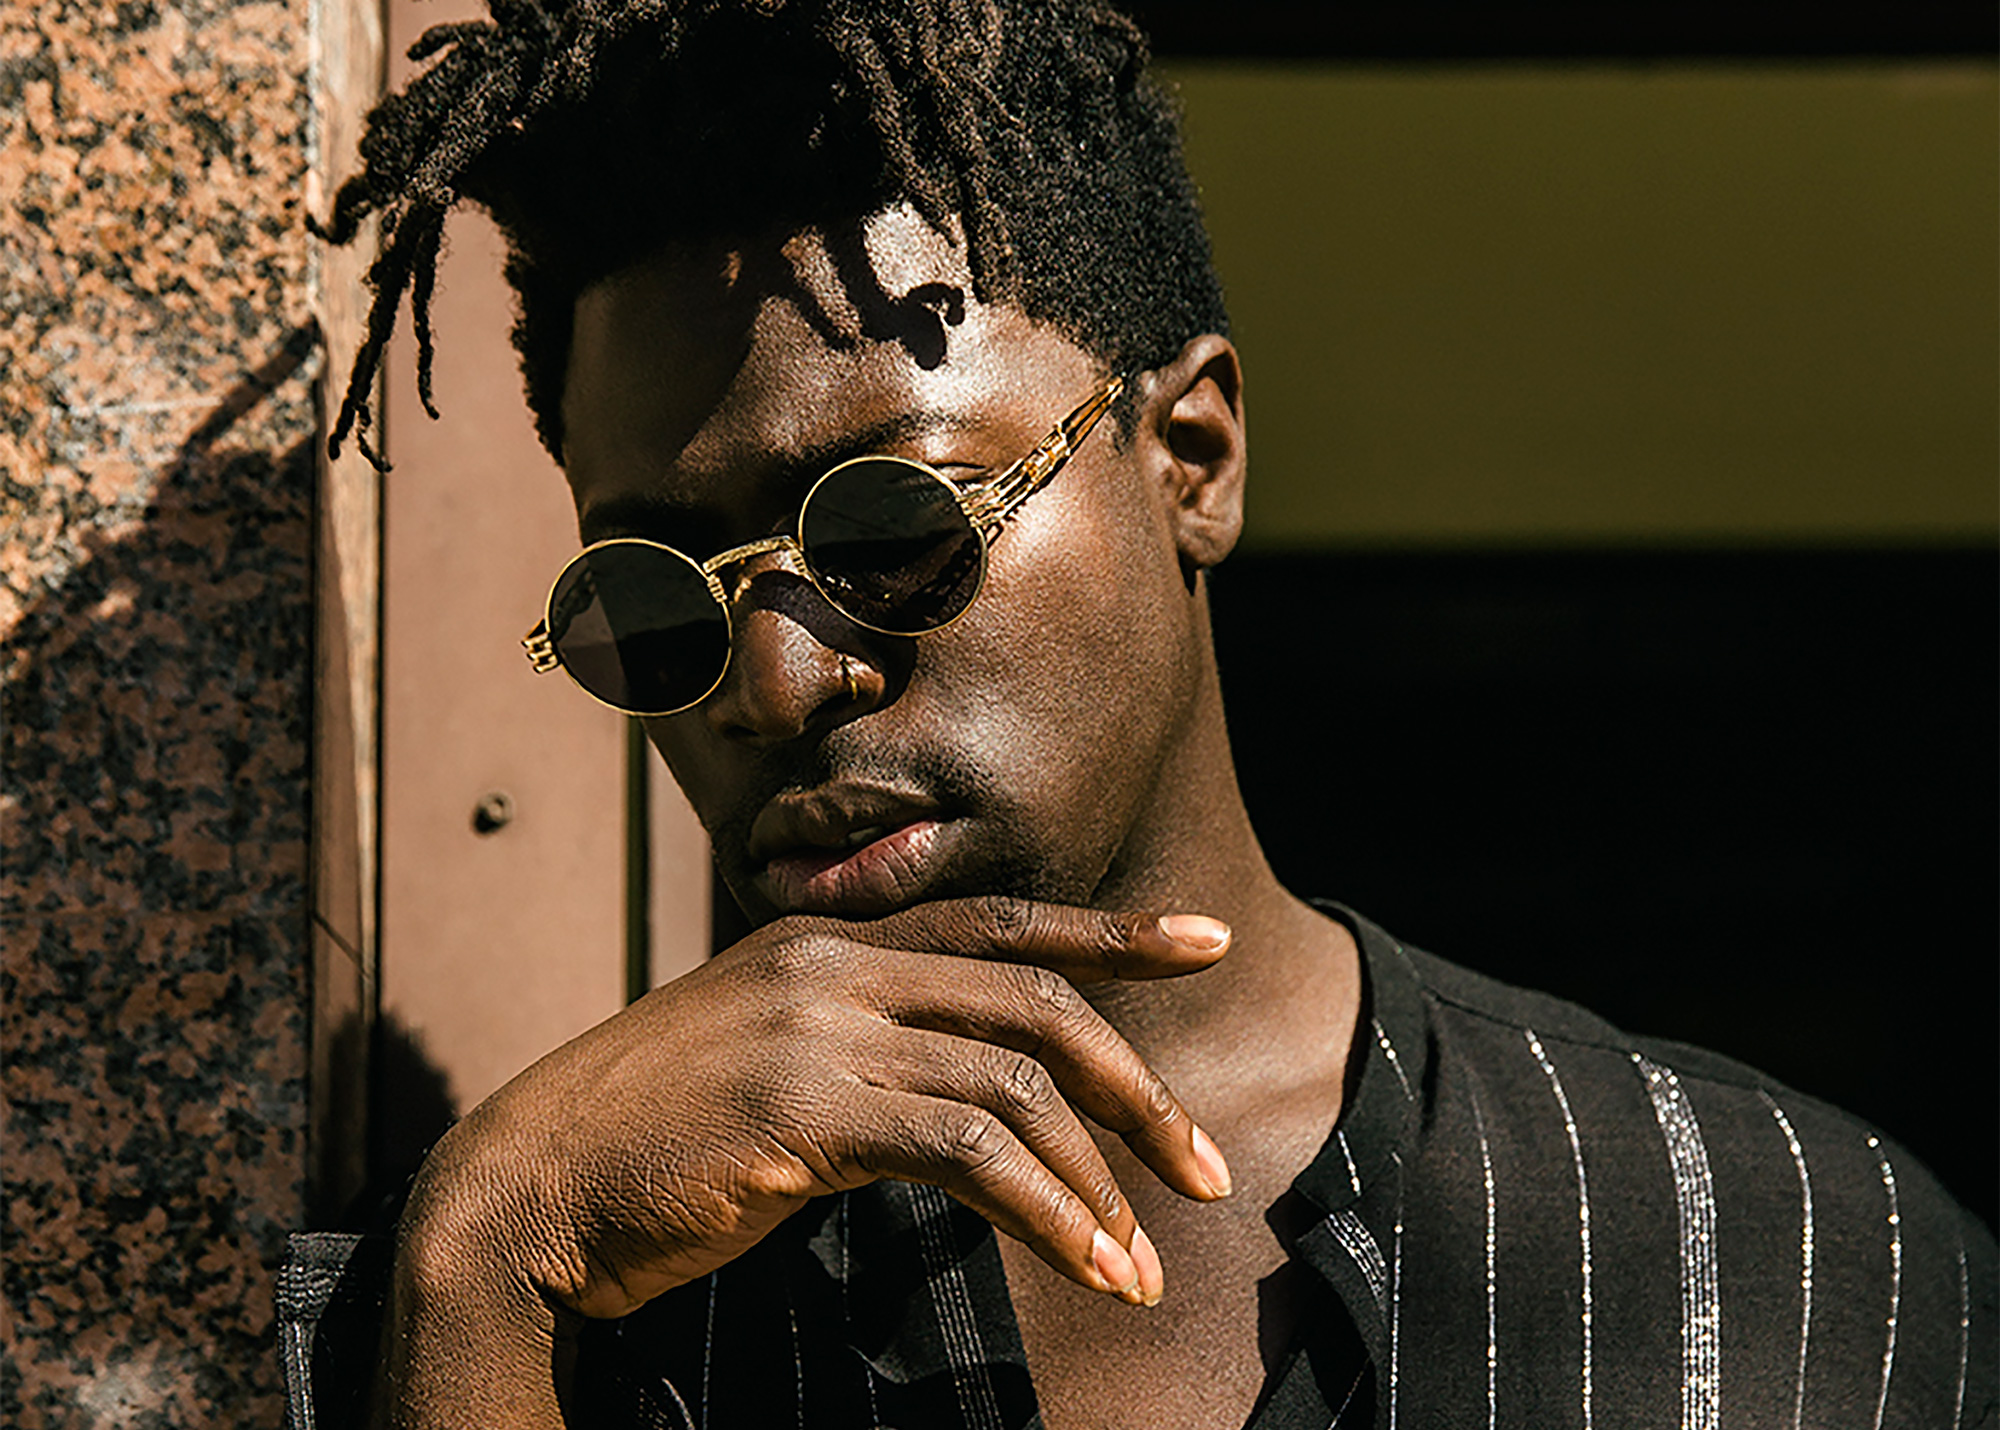 Meaning of Don't Bother Calling by Moses Sumney